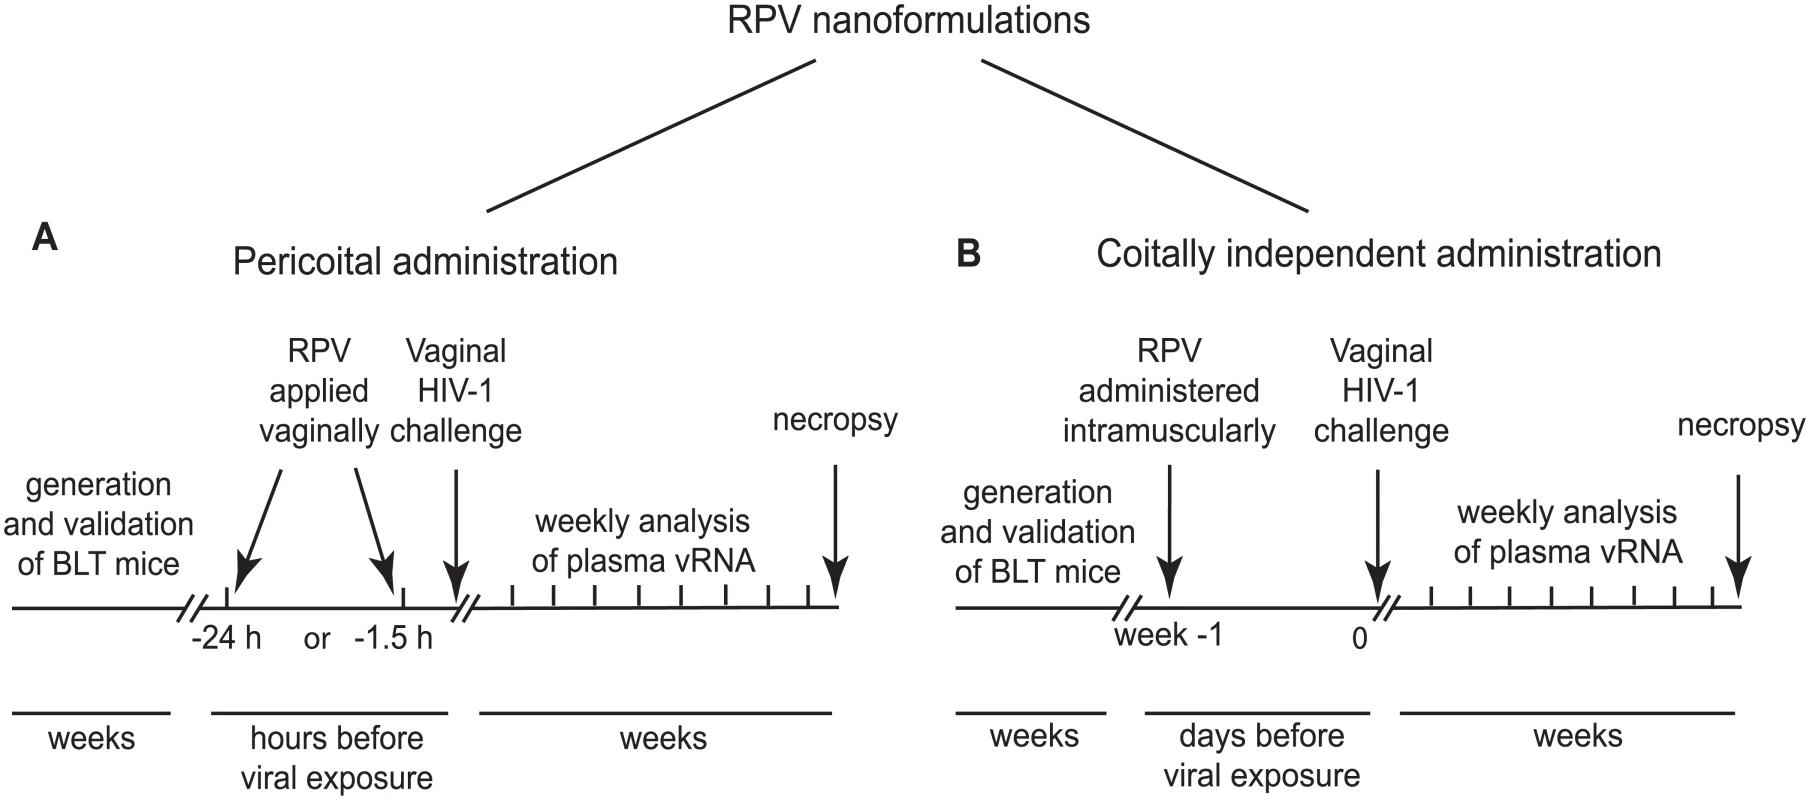 Experimental design for the evaluation of efficacy of RPV nanoformulations in prevention of vaginal HIV transmission in humanized BLT mice.